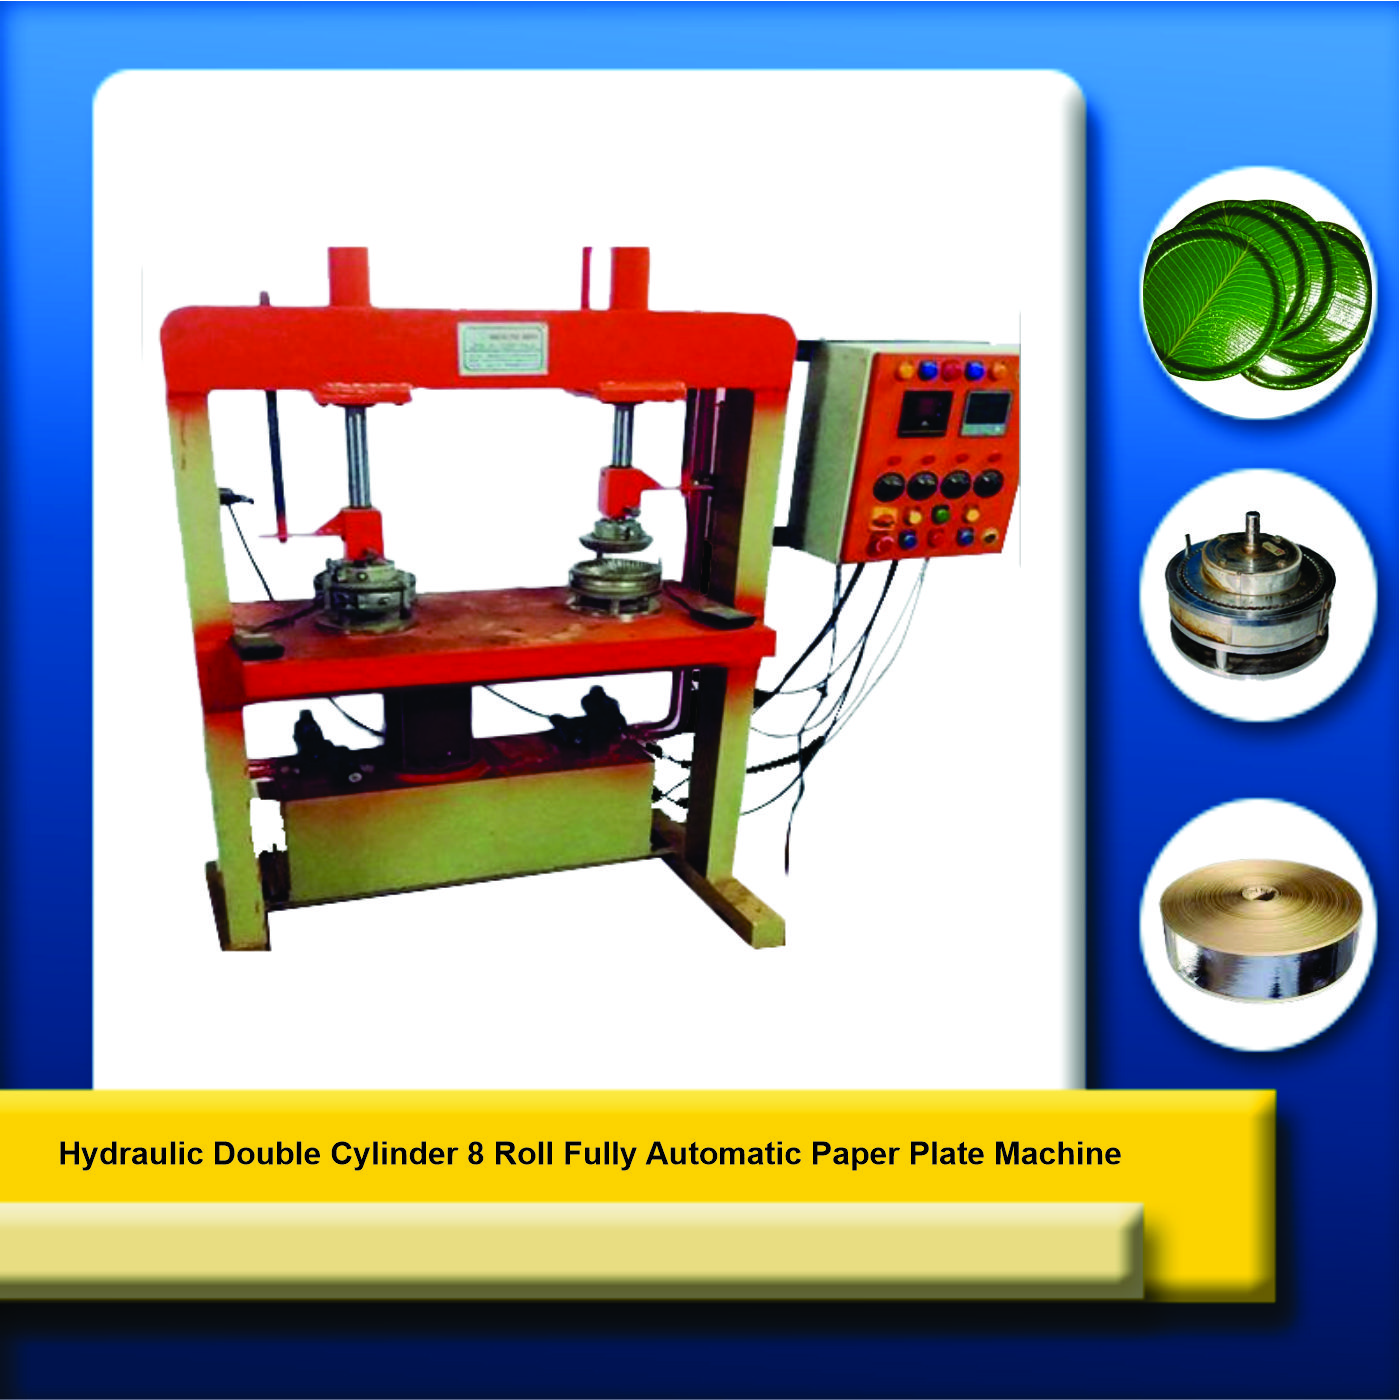 hydraulic double die double cylinder paper plate machine